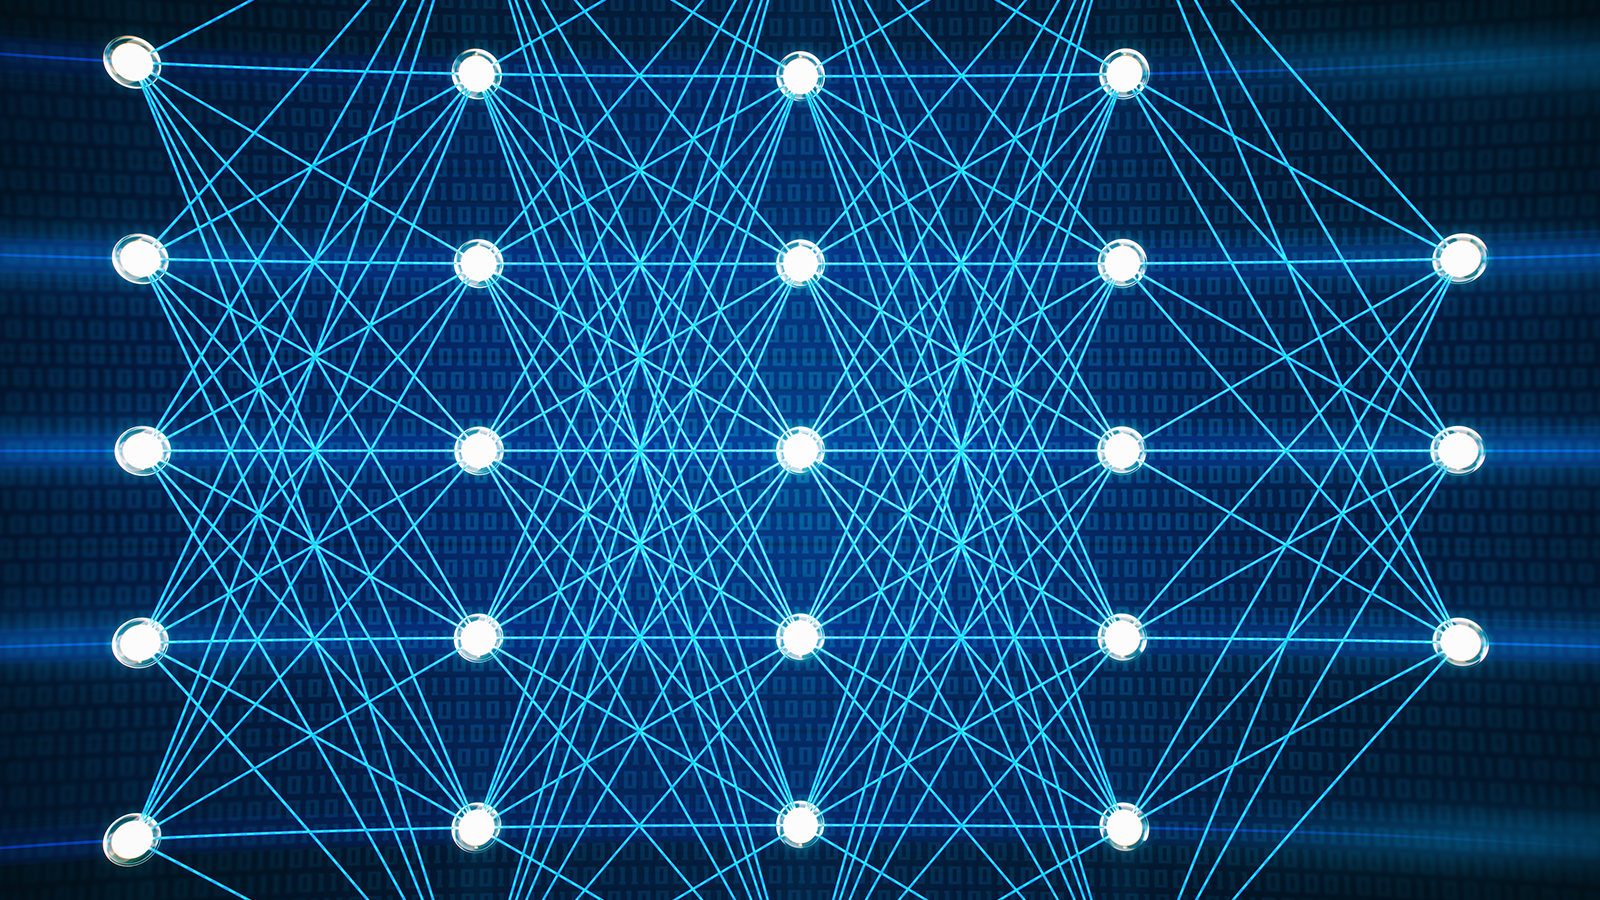 Rows of white dots connected by blue lines to indicate a neural network